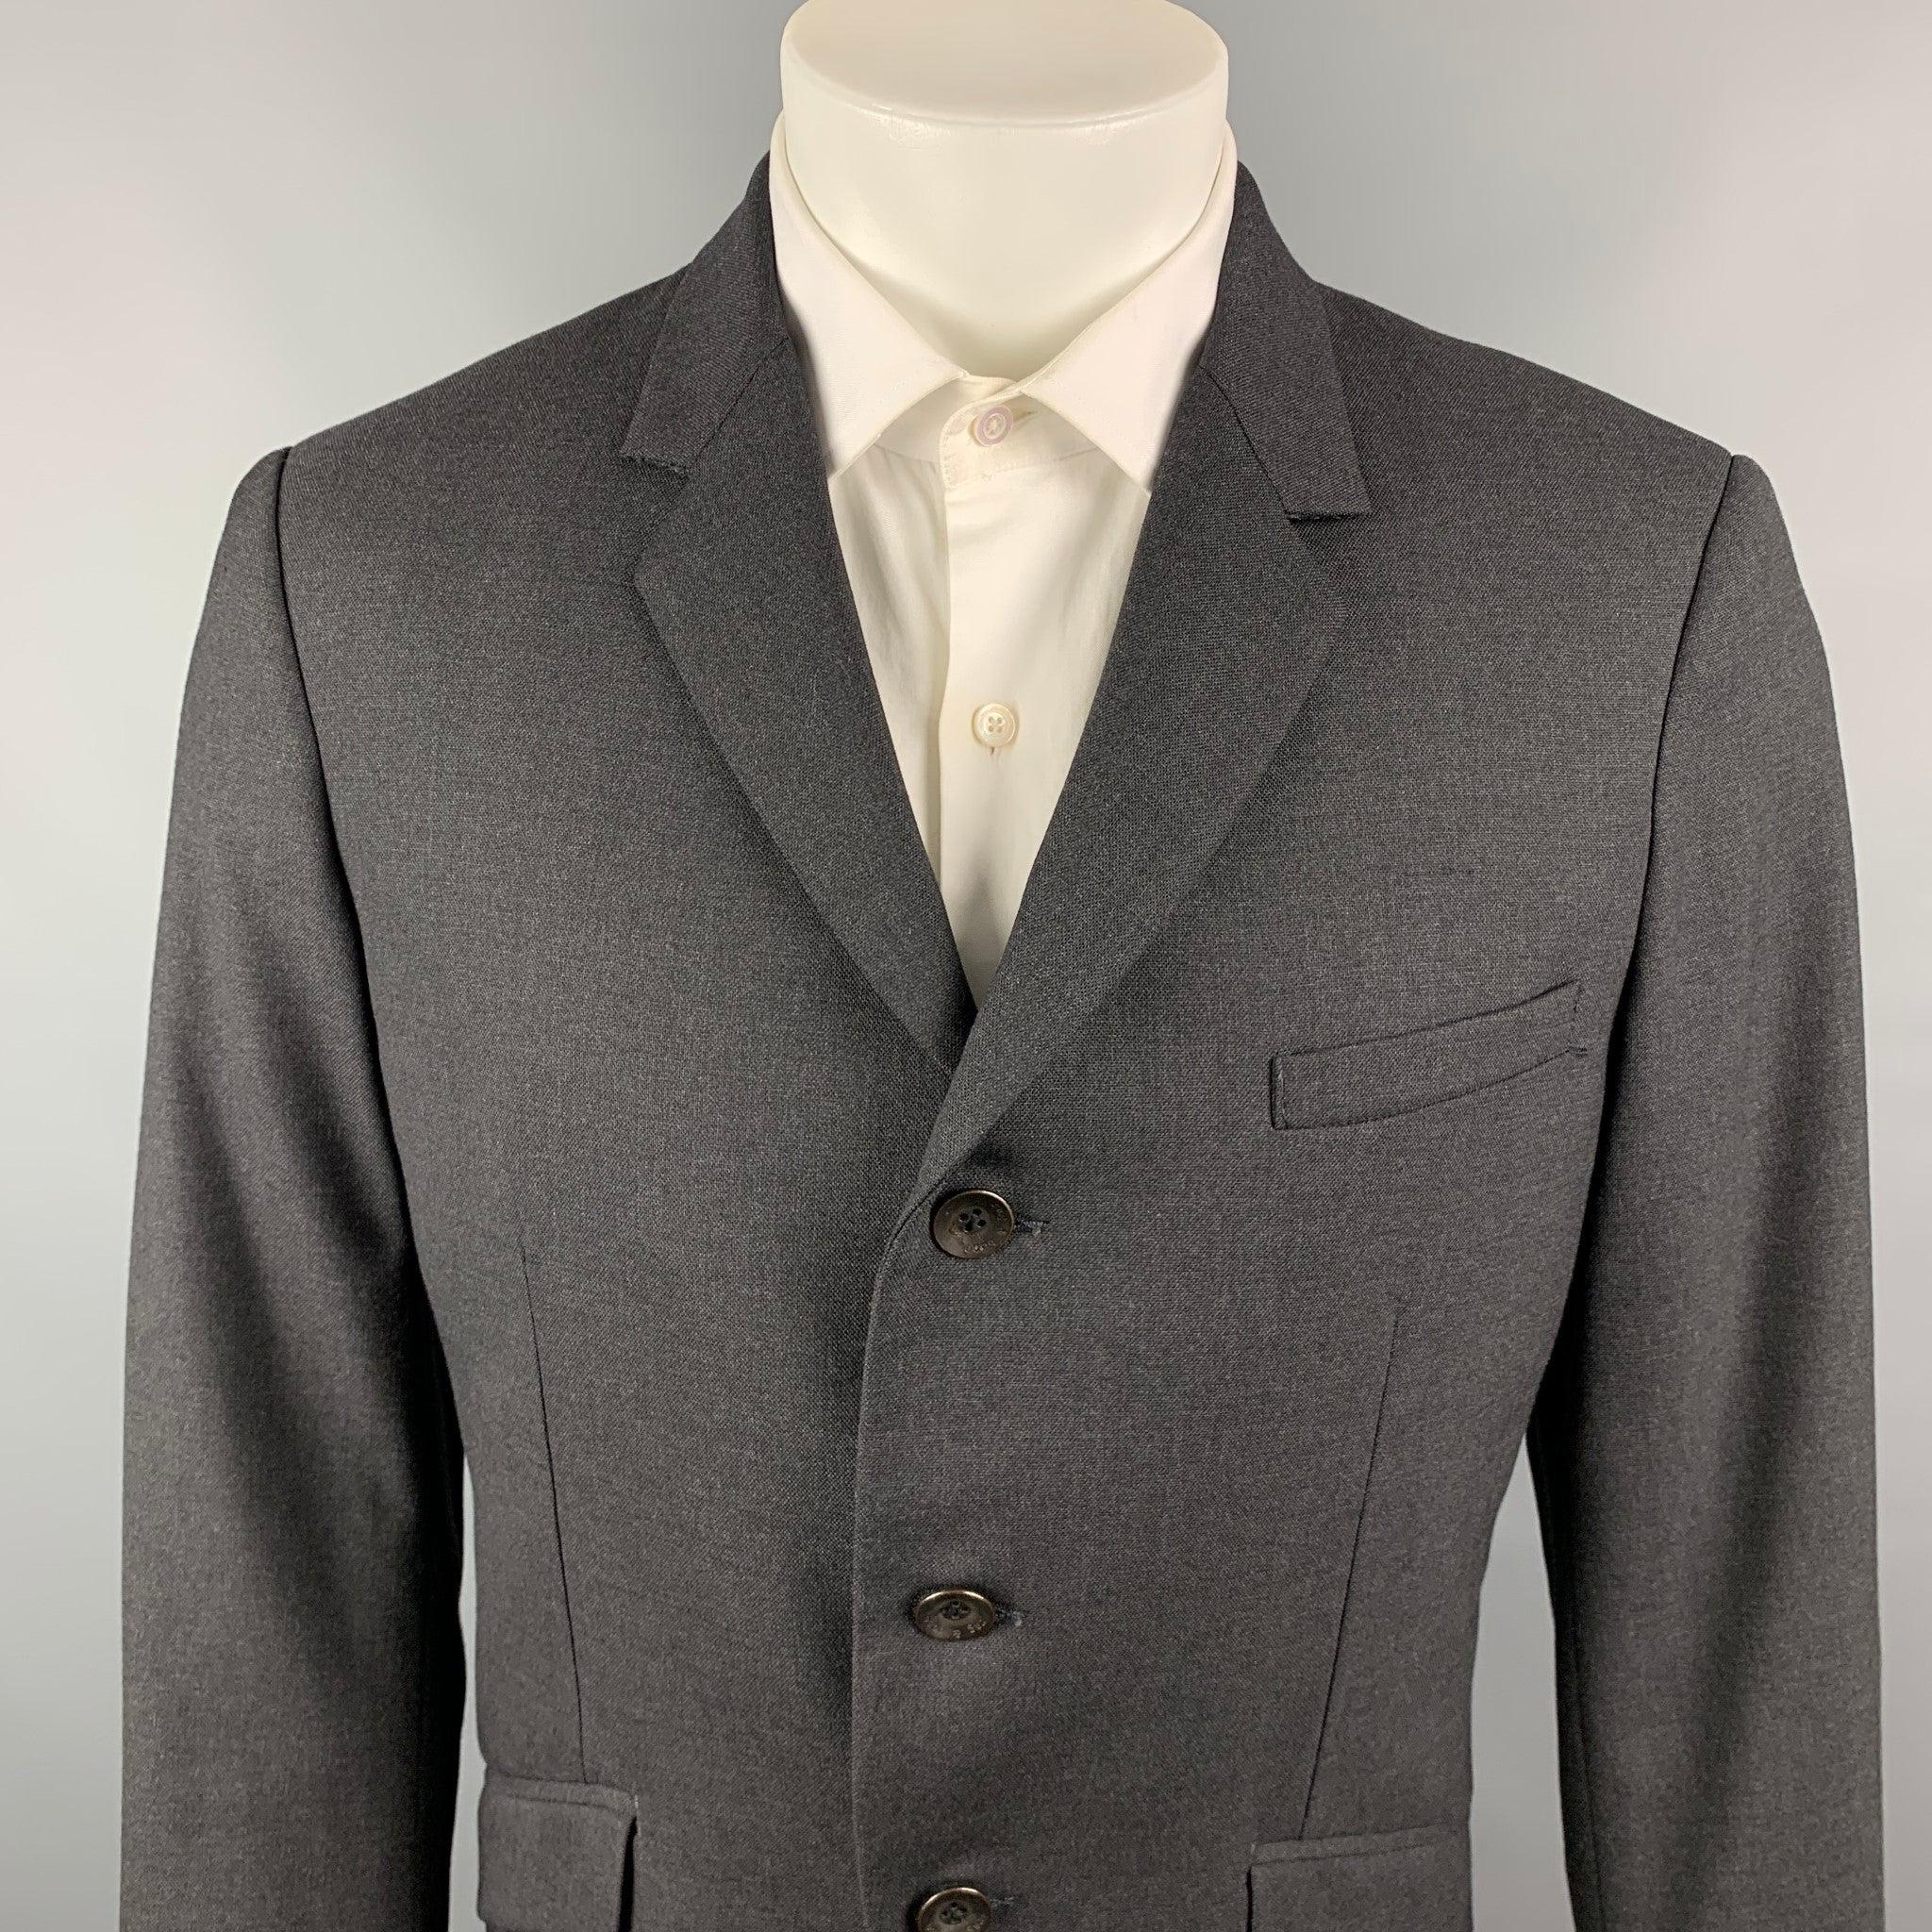 RAG & BONE sport coat comes in a charcoal wool with a full liner featuring a notch lapel, flap pockets, and a three button closure. Made in USA.Very Good Pre-Owned Condition. 

Marked:   40 

Measurements: 
 
Shoulder: 18 inches  Chest: 40 inches 